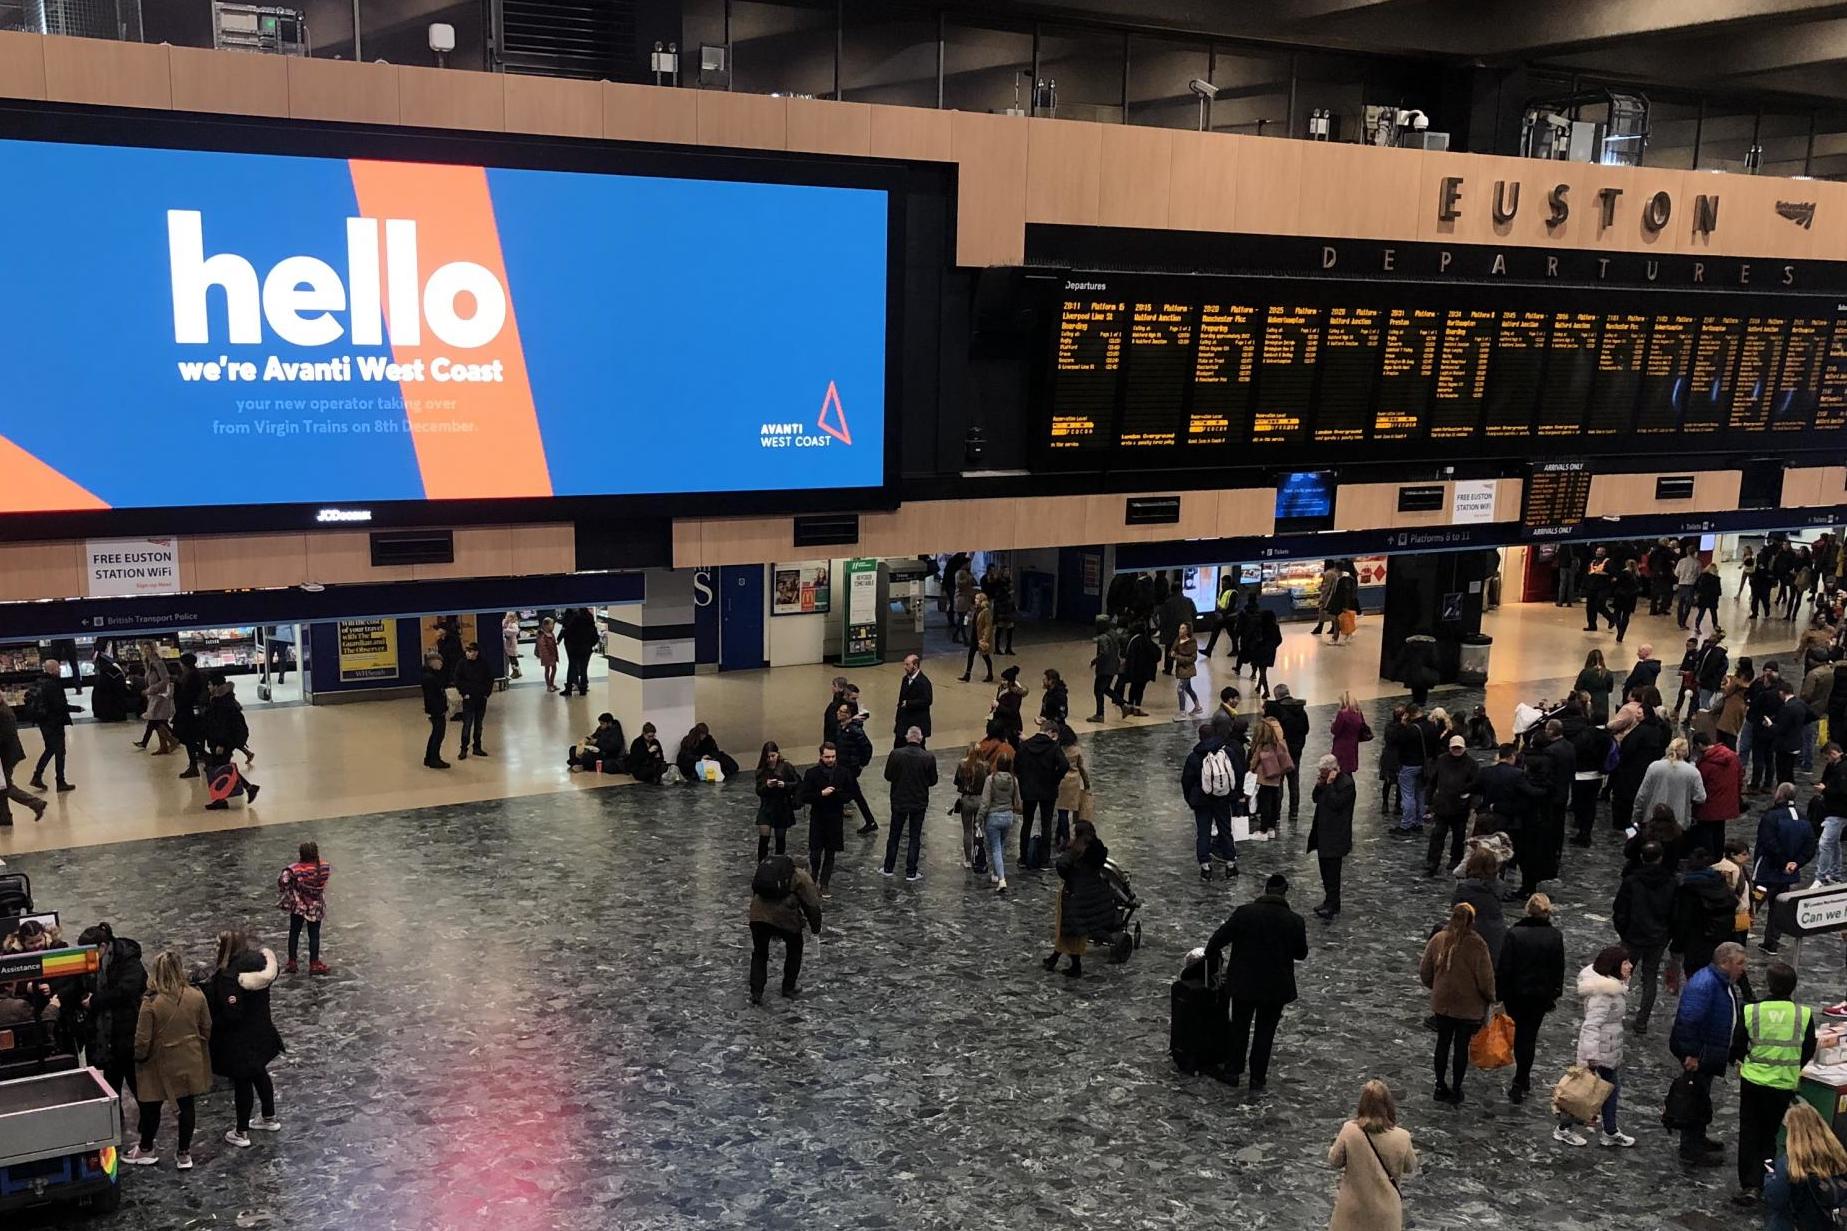 All change: Avanti announces its arrival at London Euston in December 2019